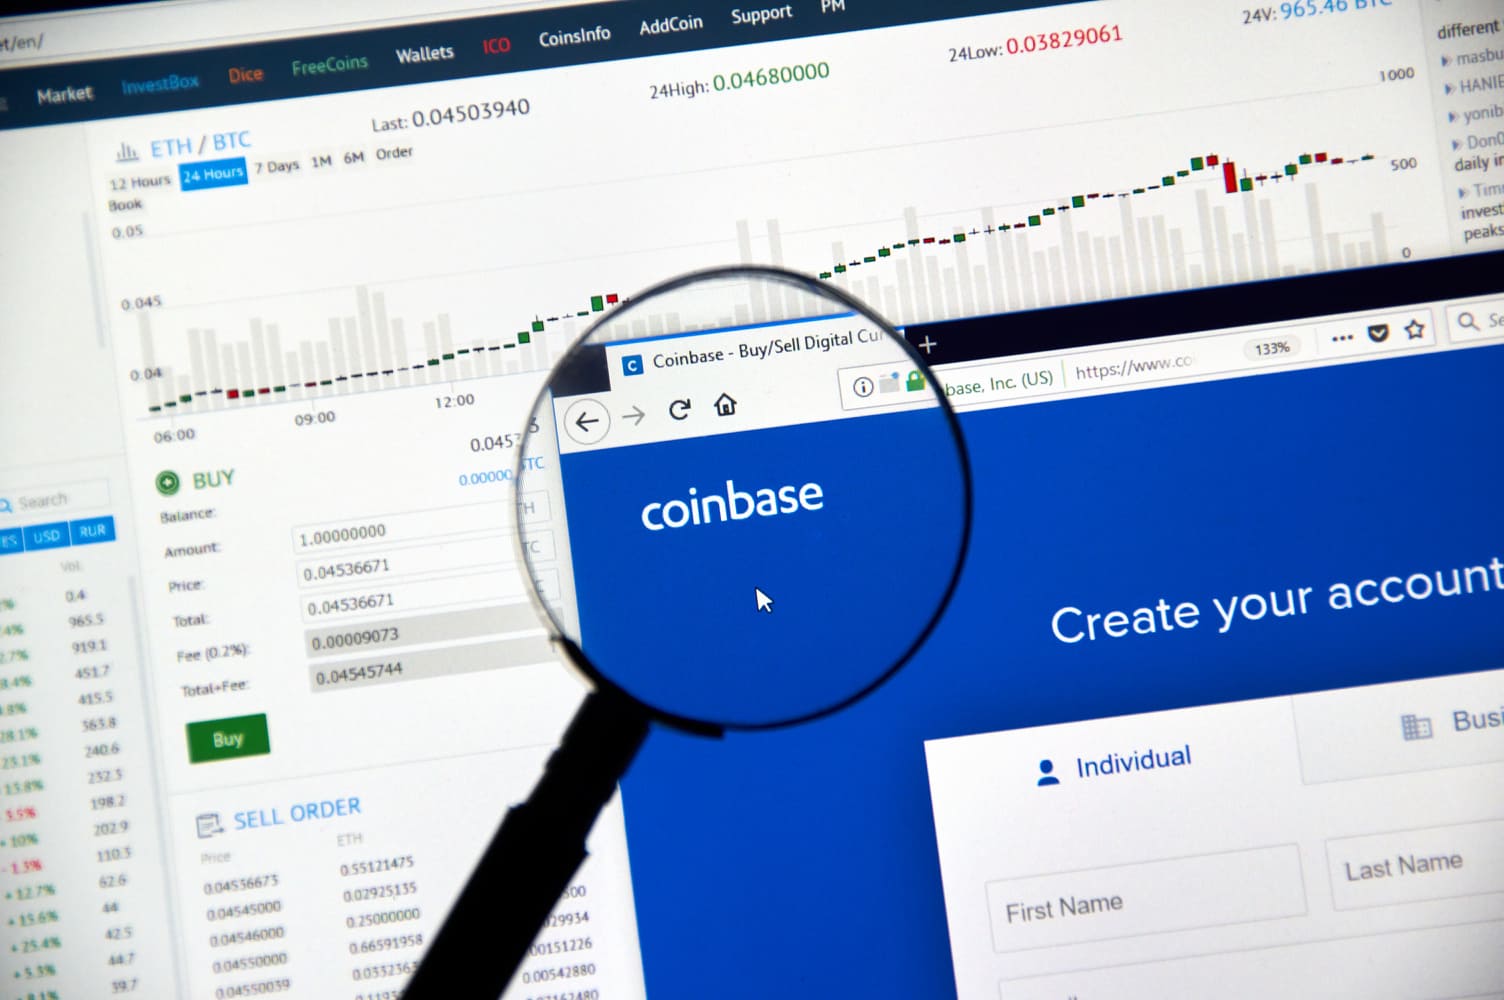 Tipee Pled Guilty In Insider Trading Scheme With Former Coinbase Employee